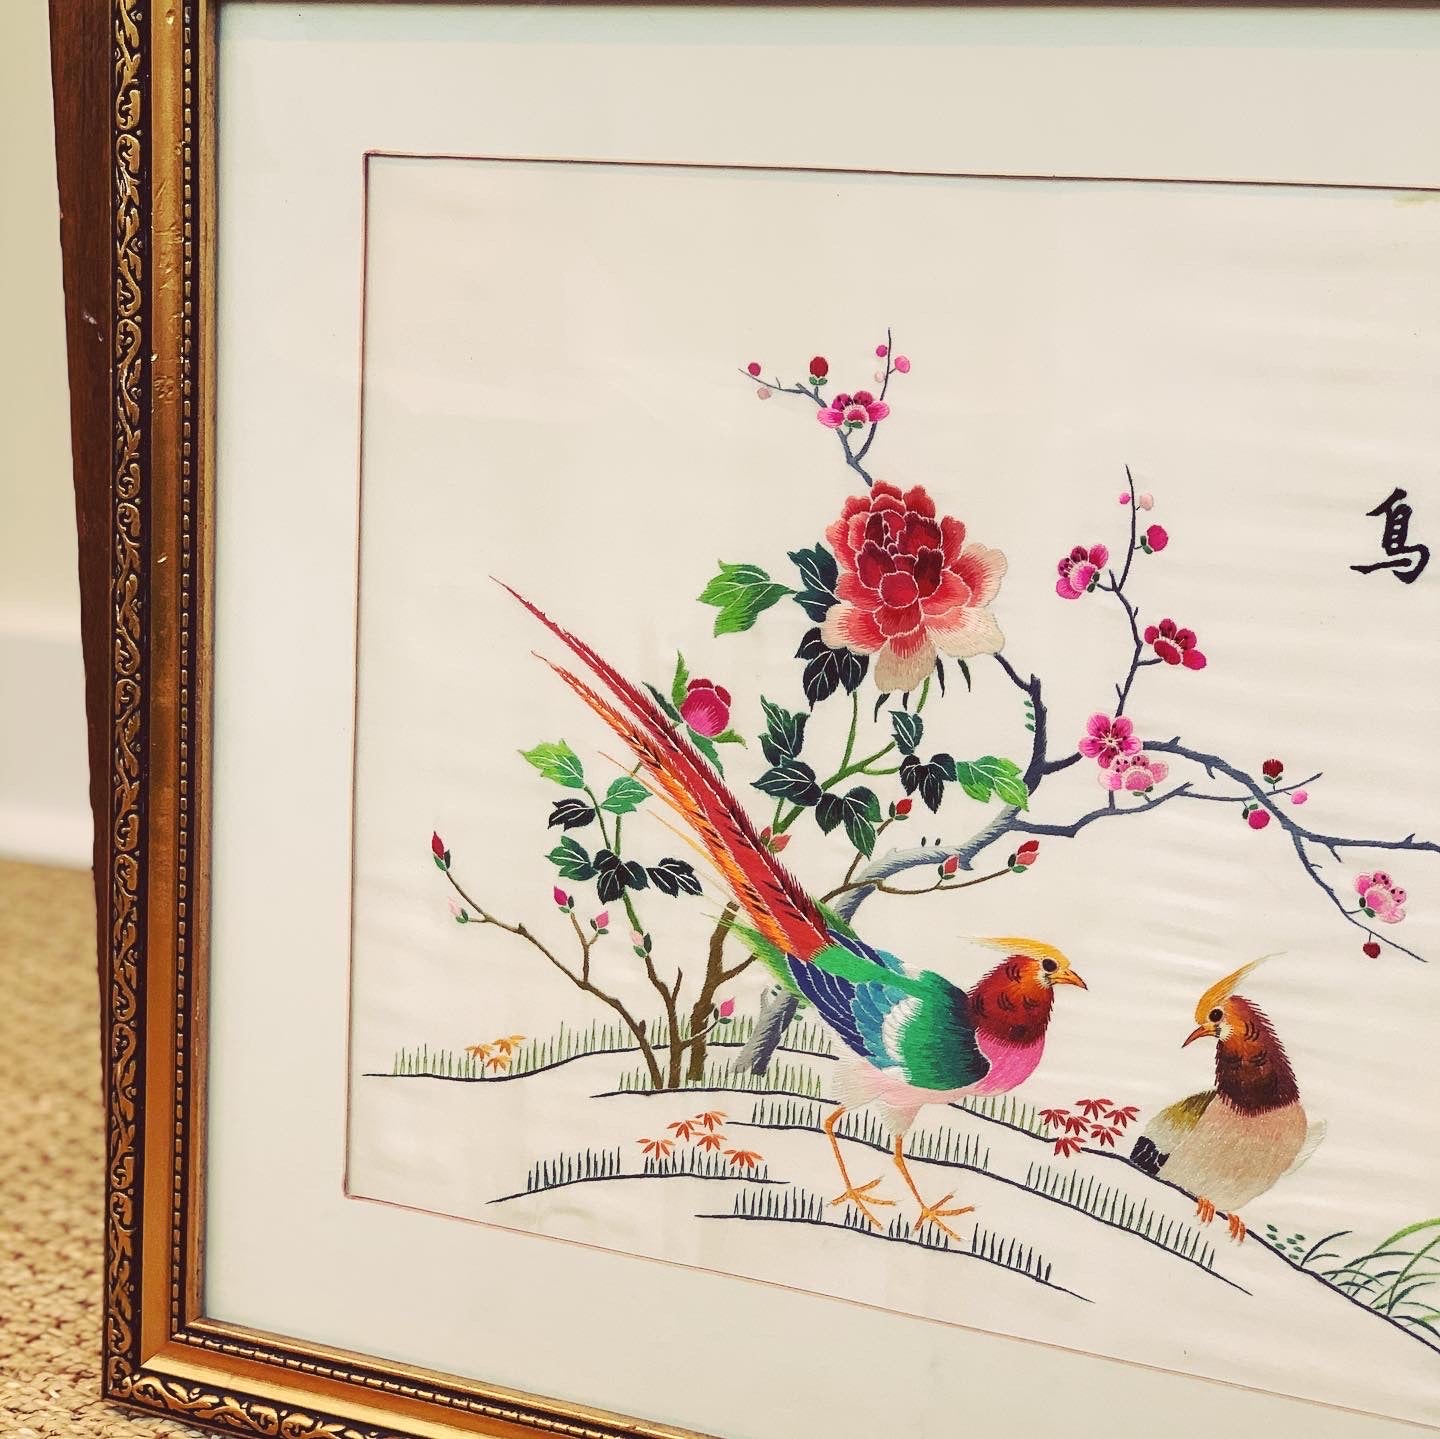 Pair of Pheasants Chinese Silk Embroidery